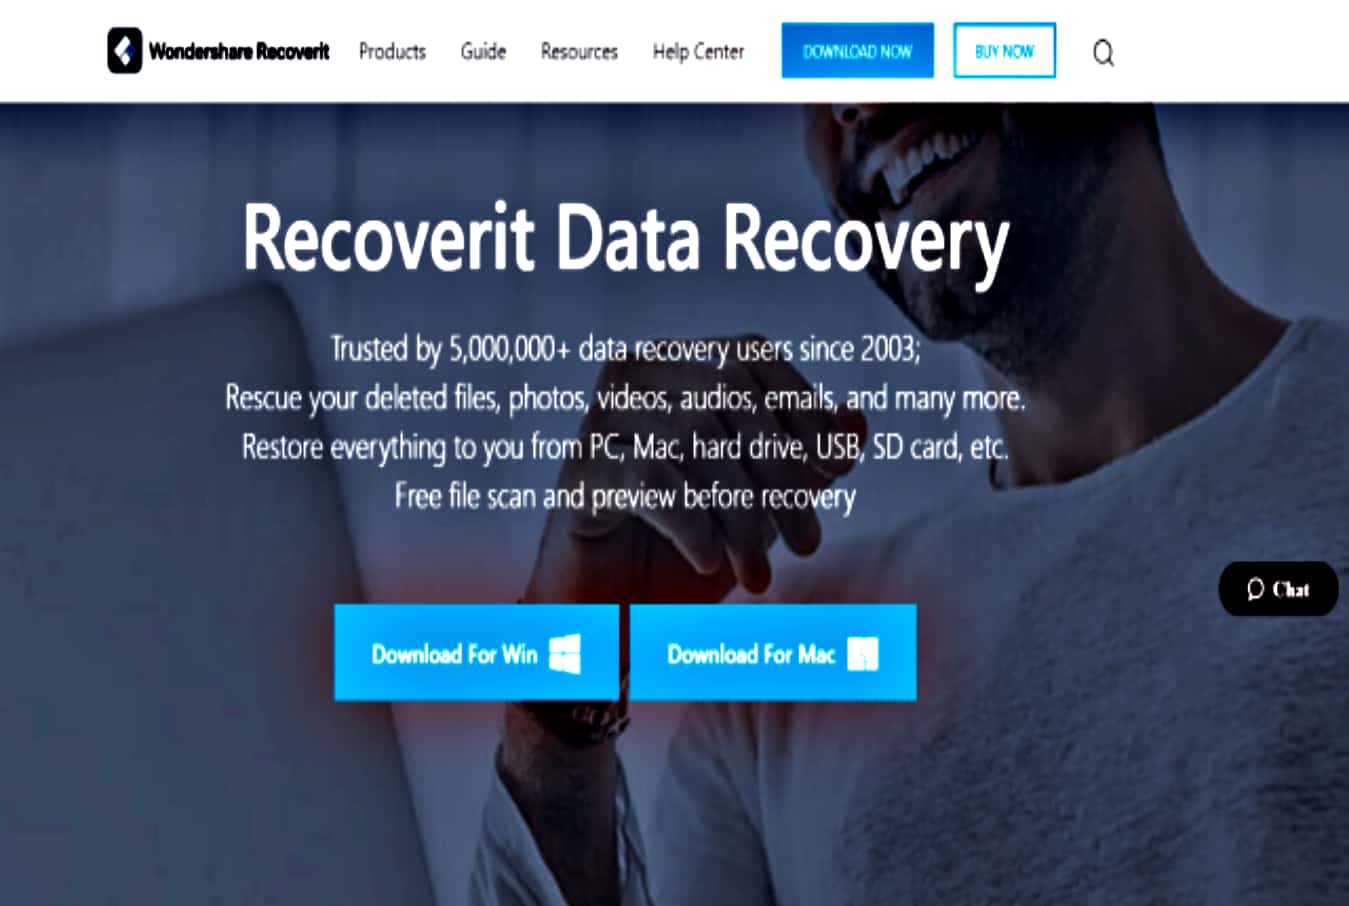 Reliable data recovery software of 2021 - Wondershare Recoverit